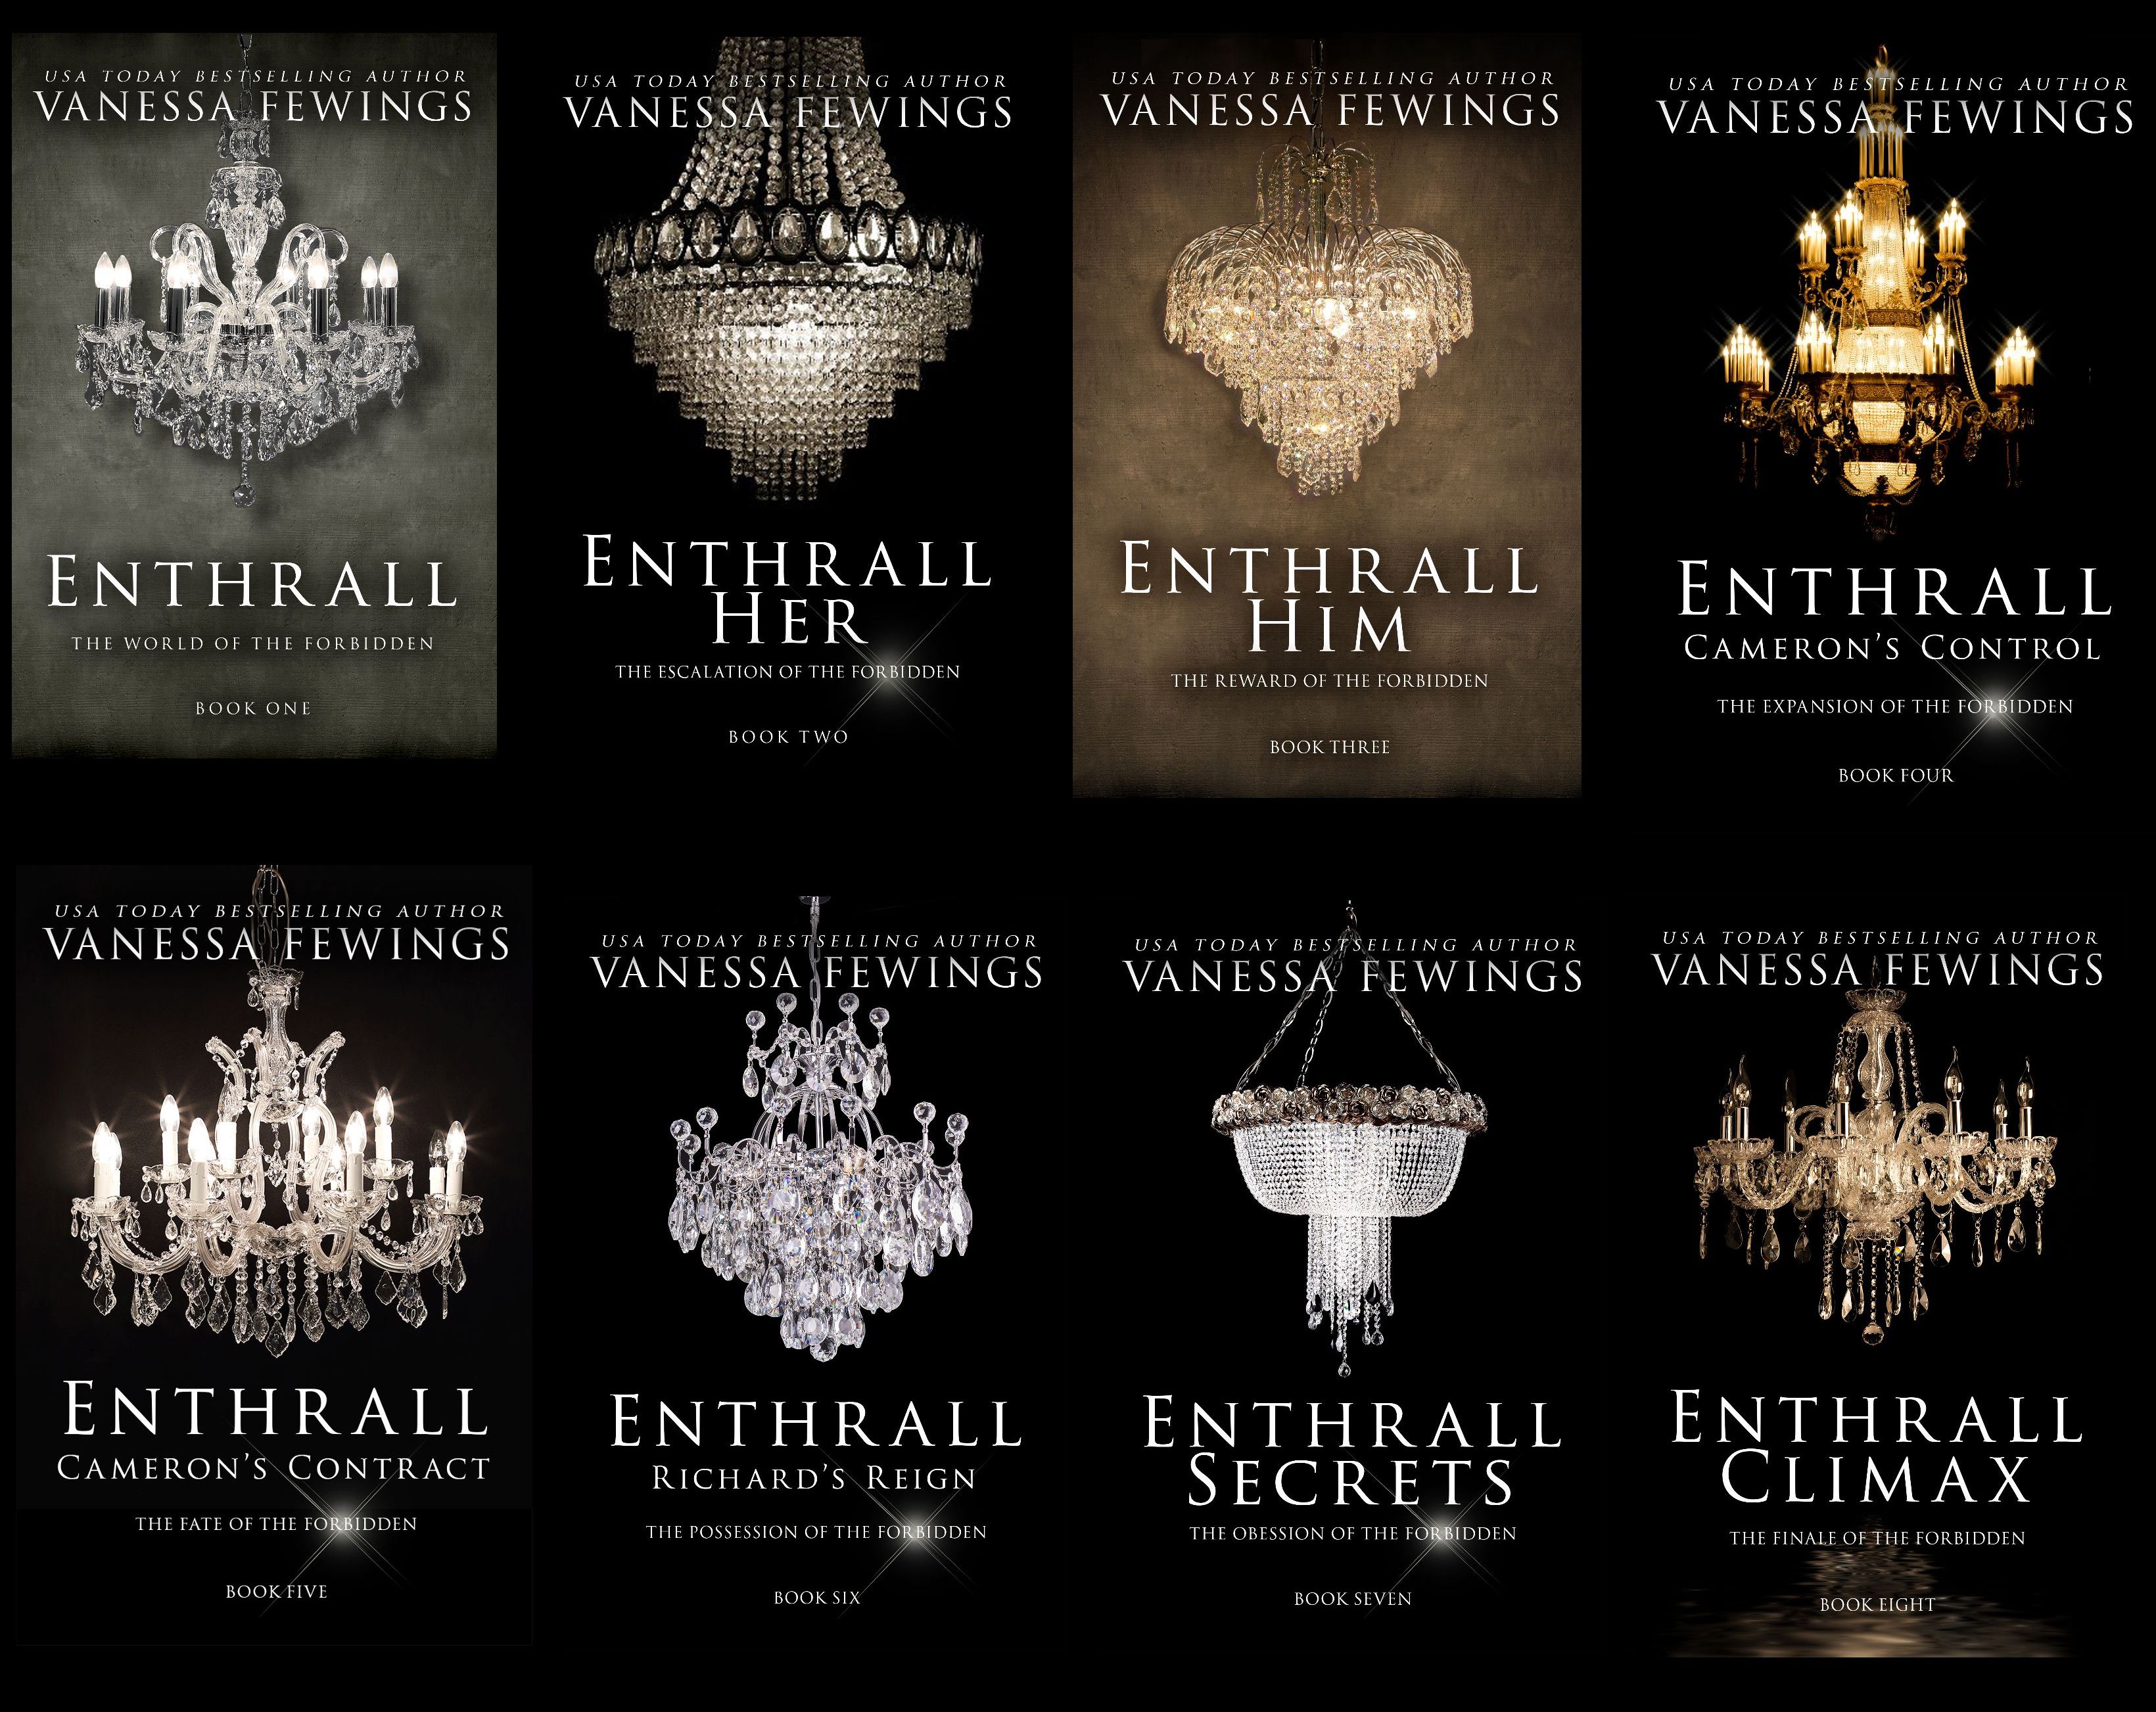 ENTHRALL SESSIONS